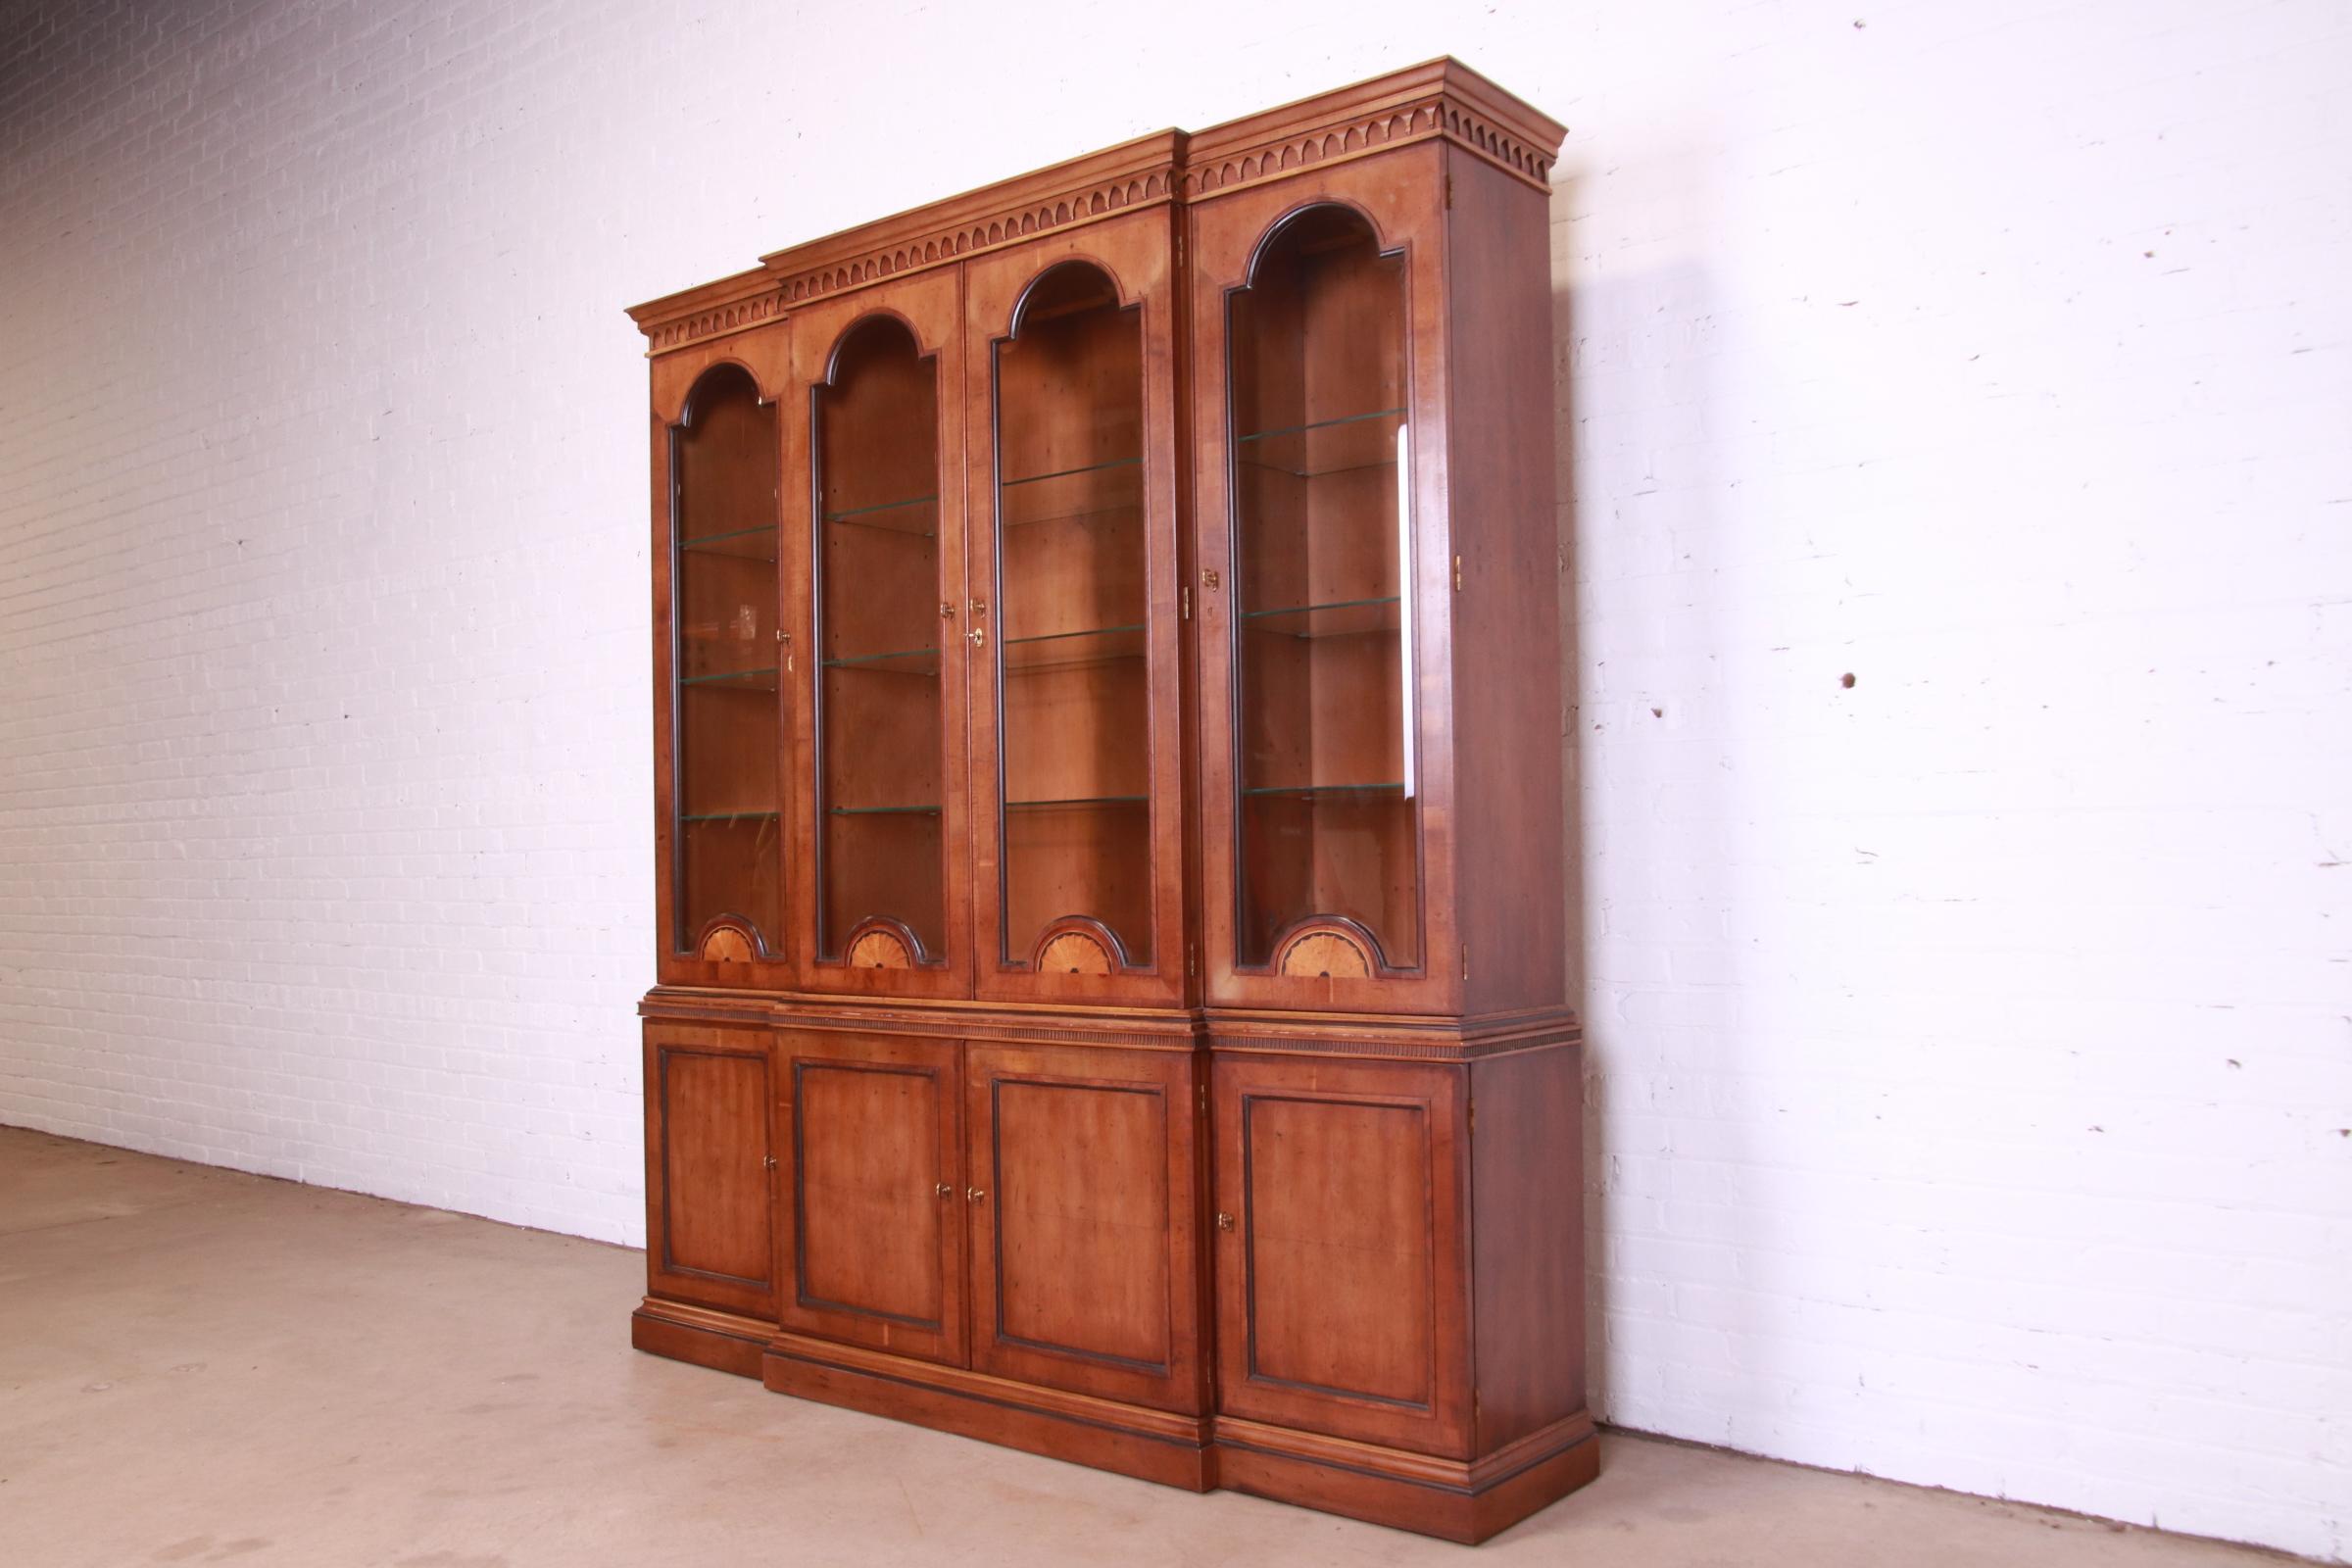 A gorgeous English Georgian style lighted breakfront bookcase or display cabinet.

By Henredon, 